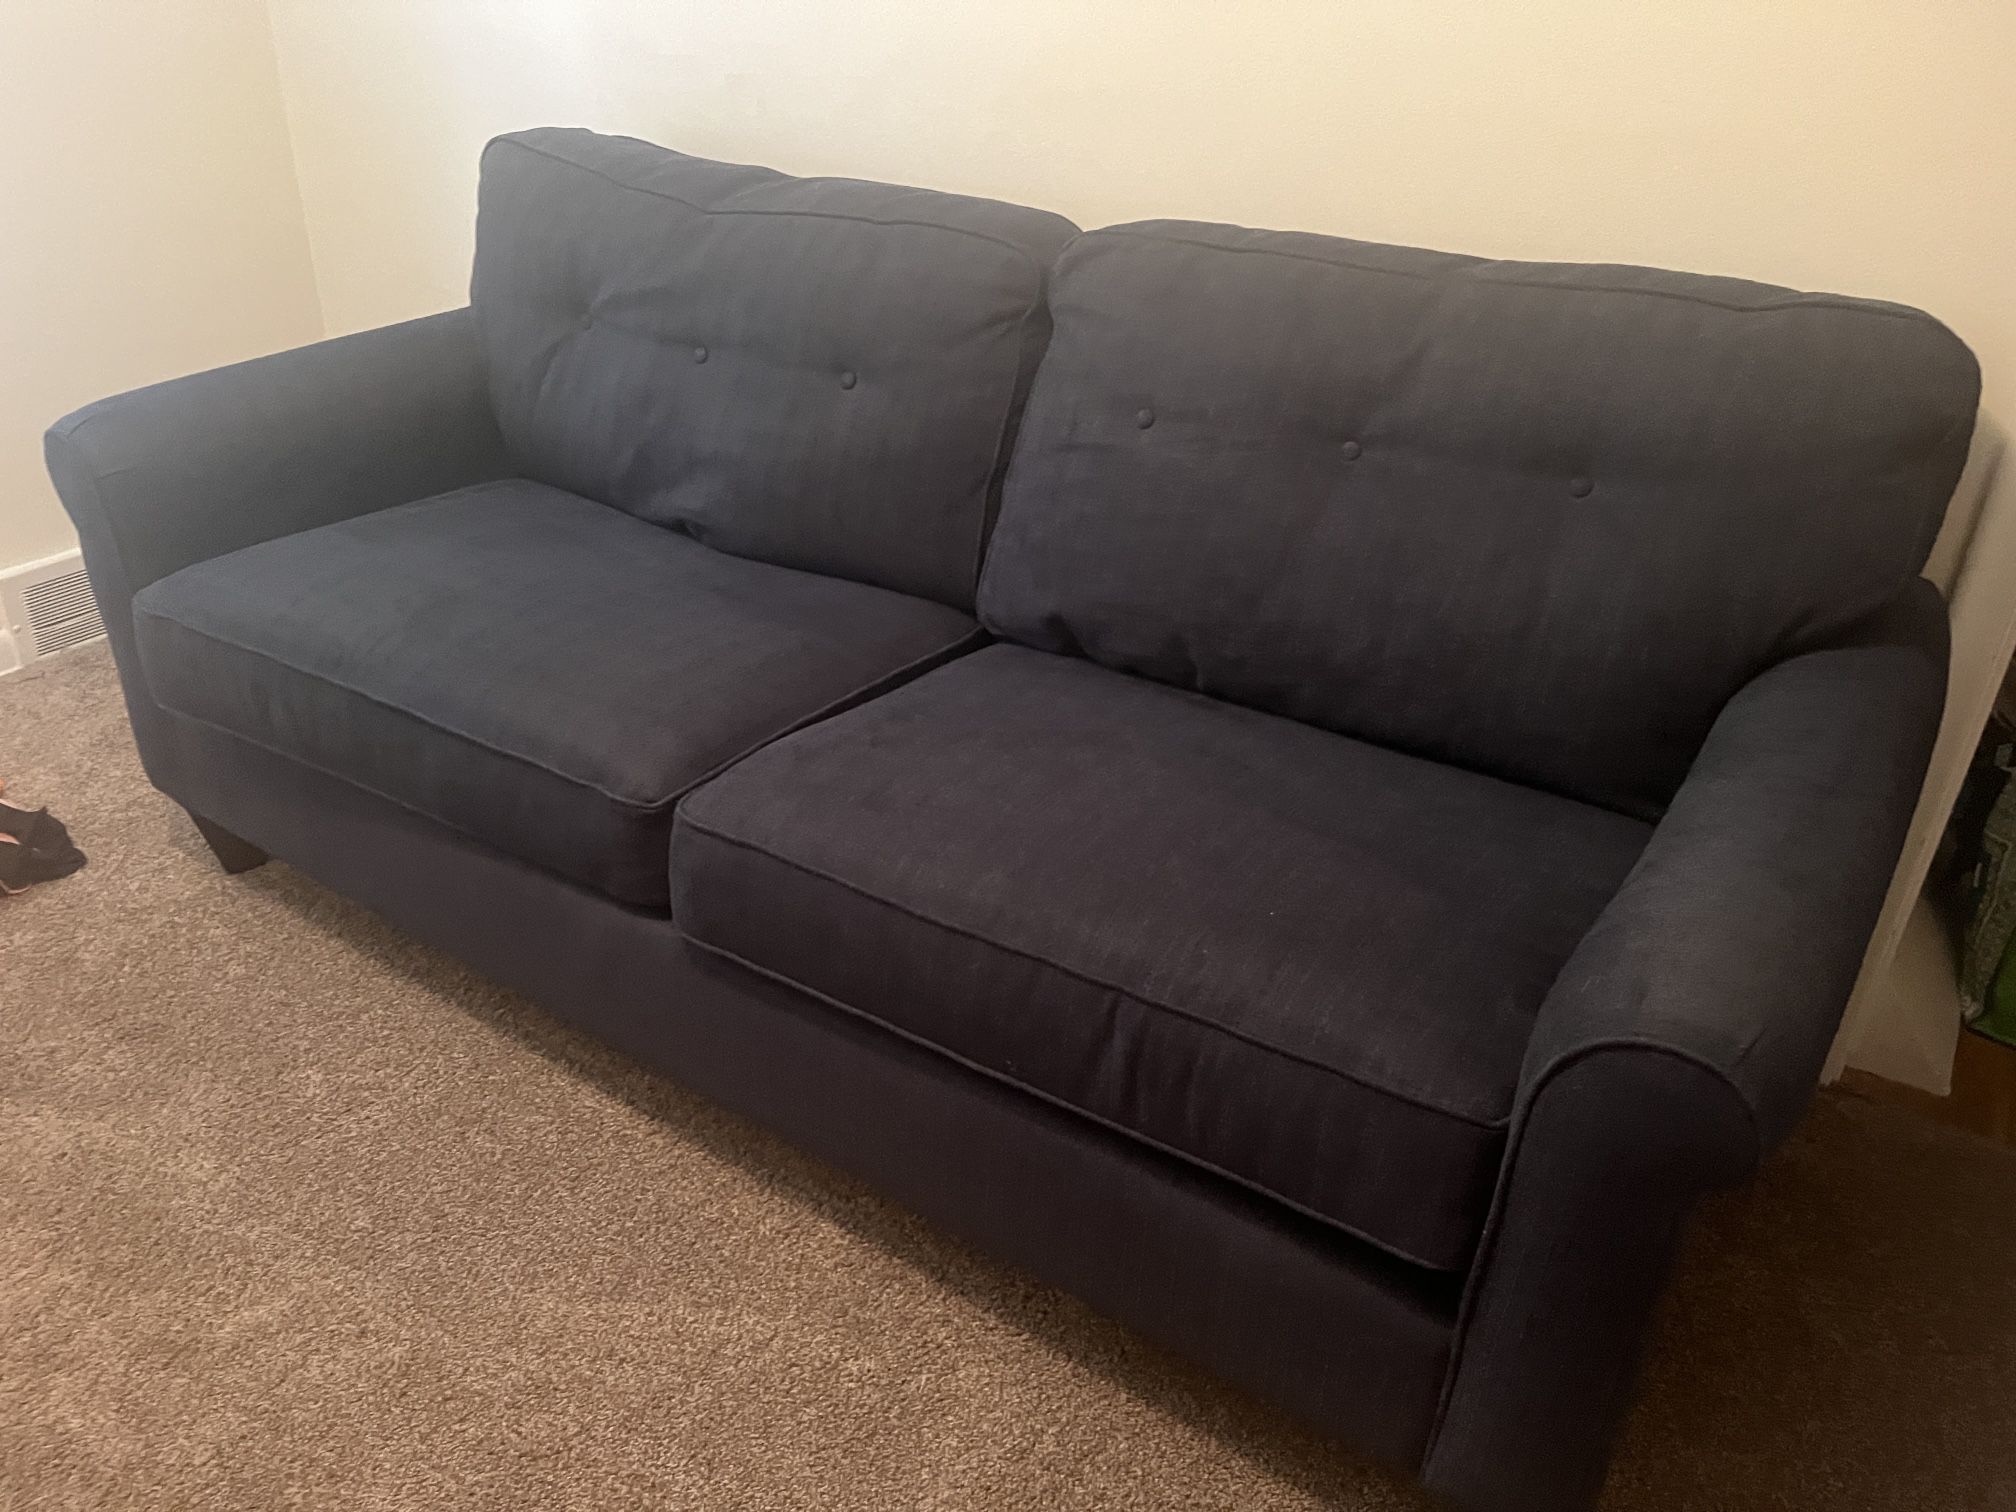 Couch/sofa 